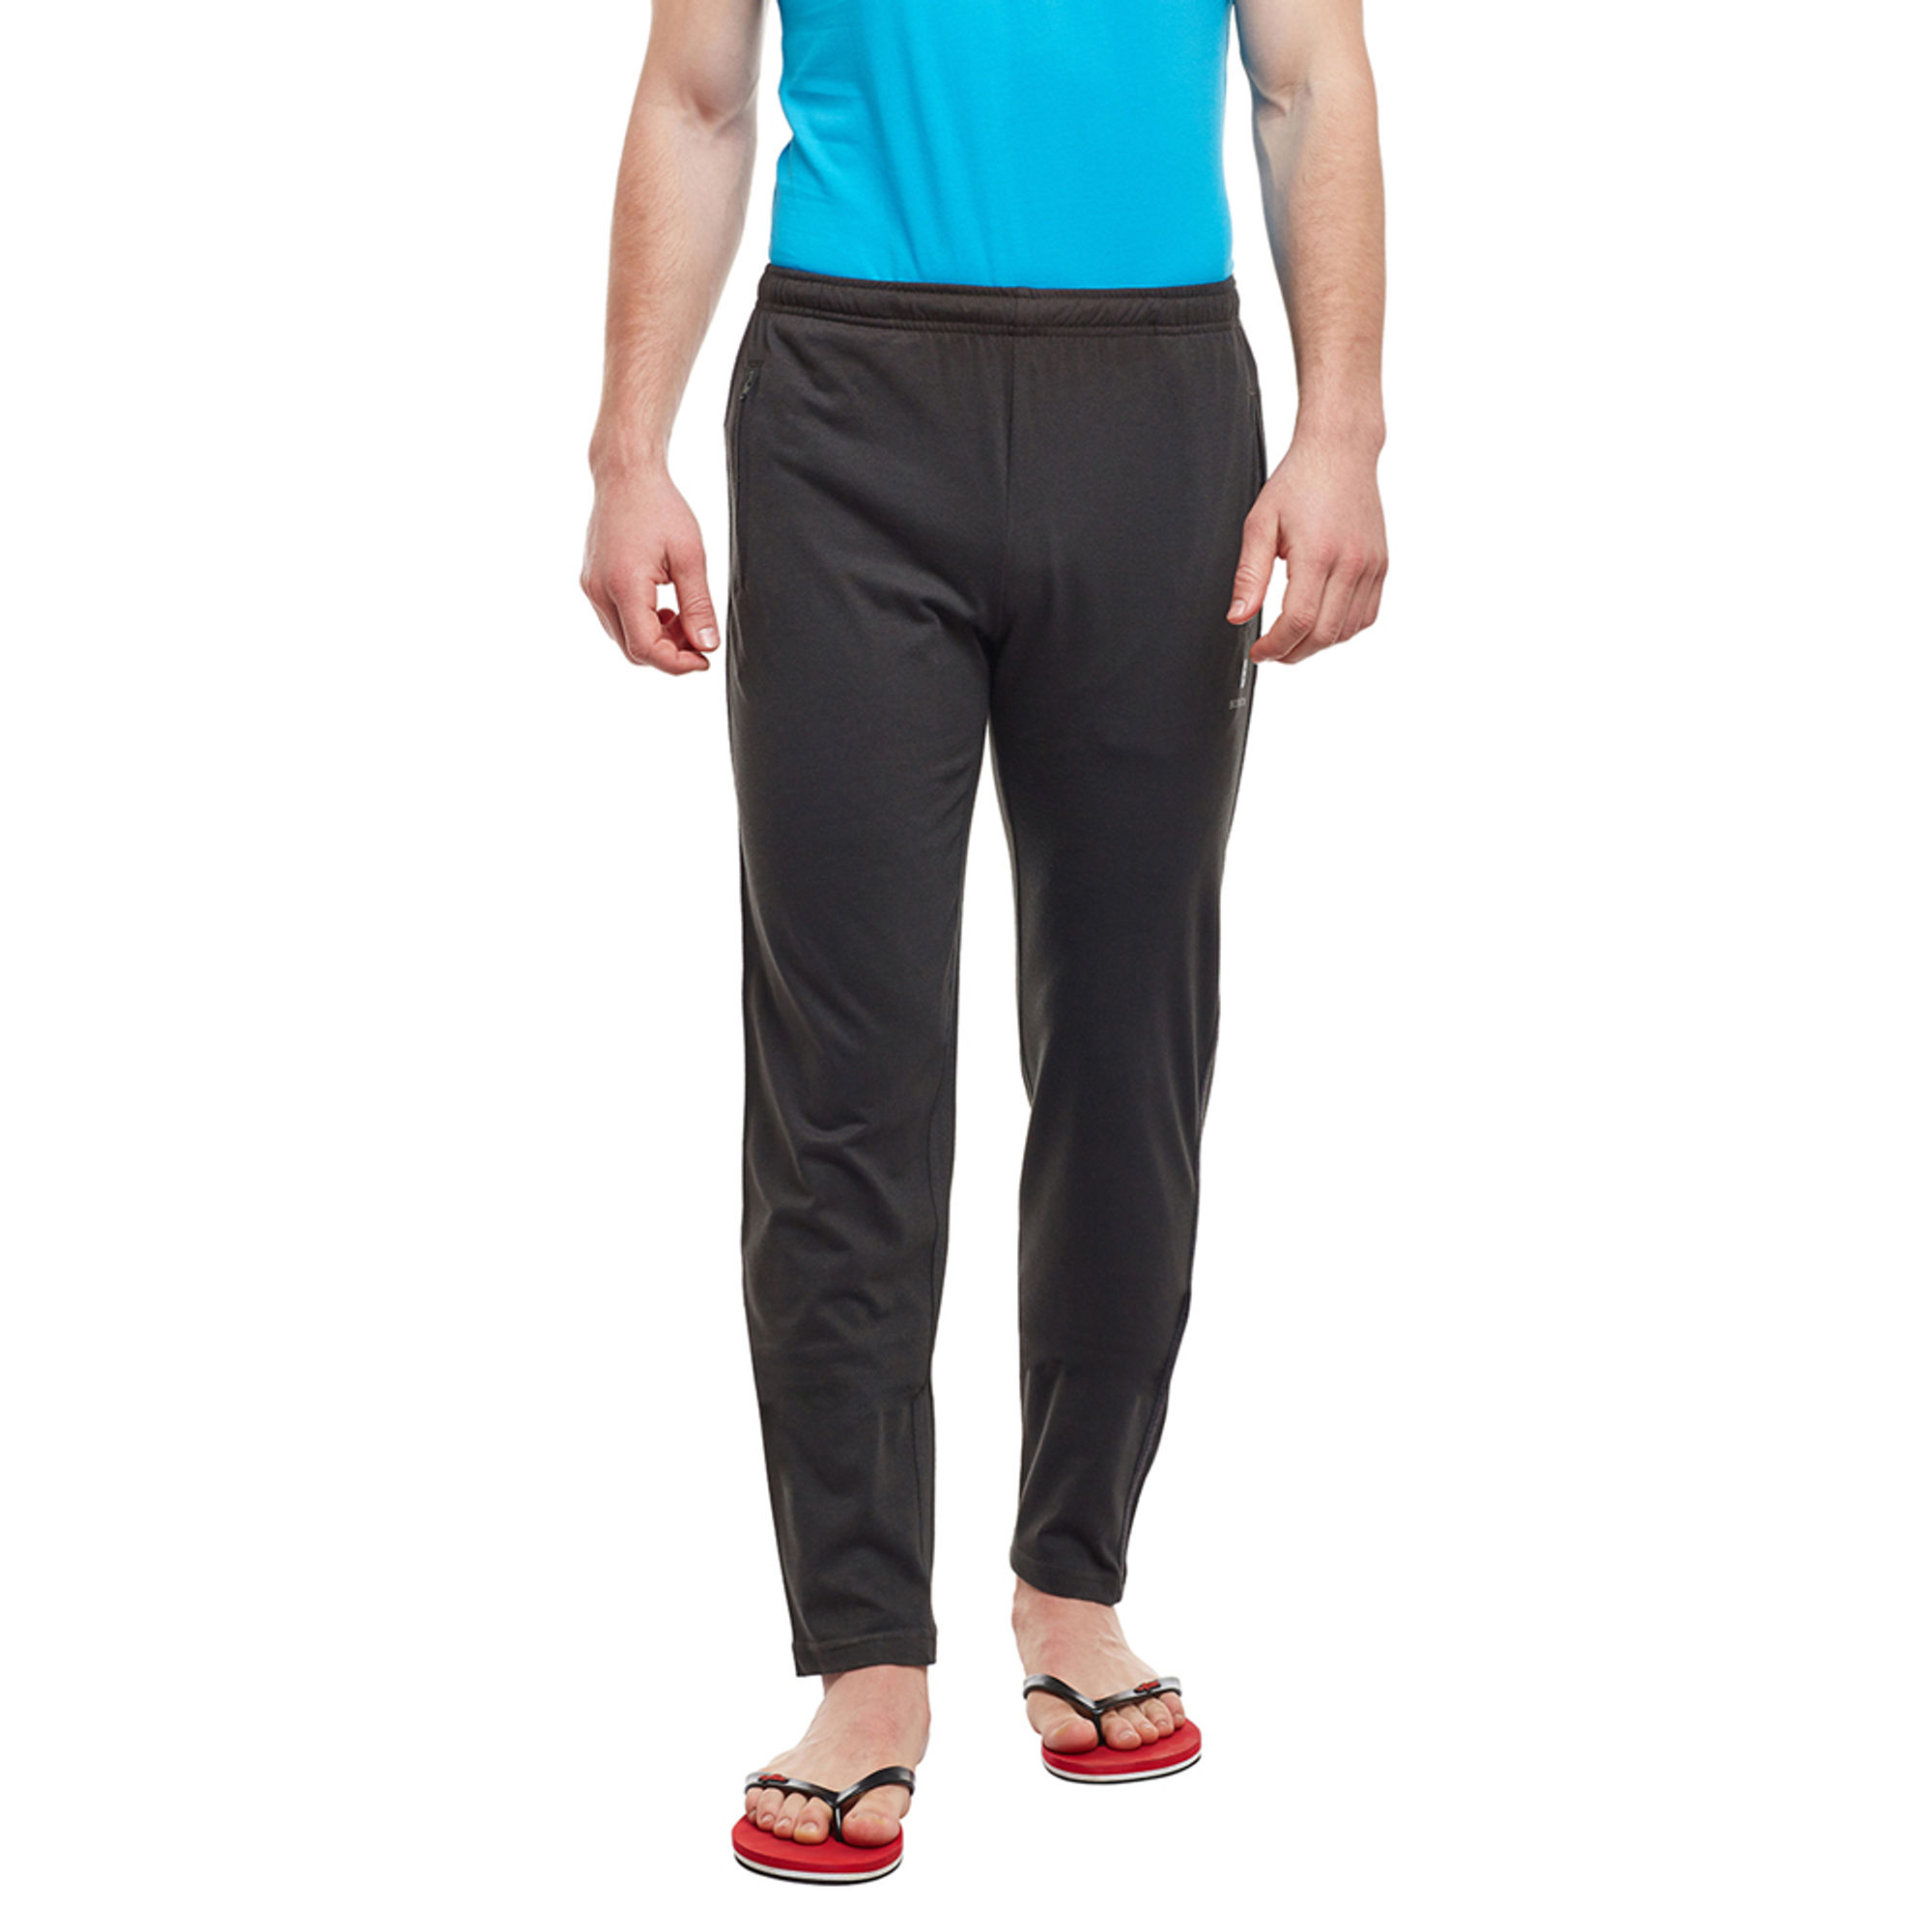 Men's Cotton Lowers/Track Pants/Sports Wear/Regular Wear/Available in 5  Attractive Colors (M, Black) : Amazon.in: Clothing & Accessories